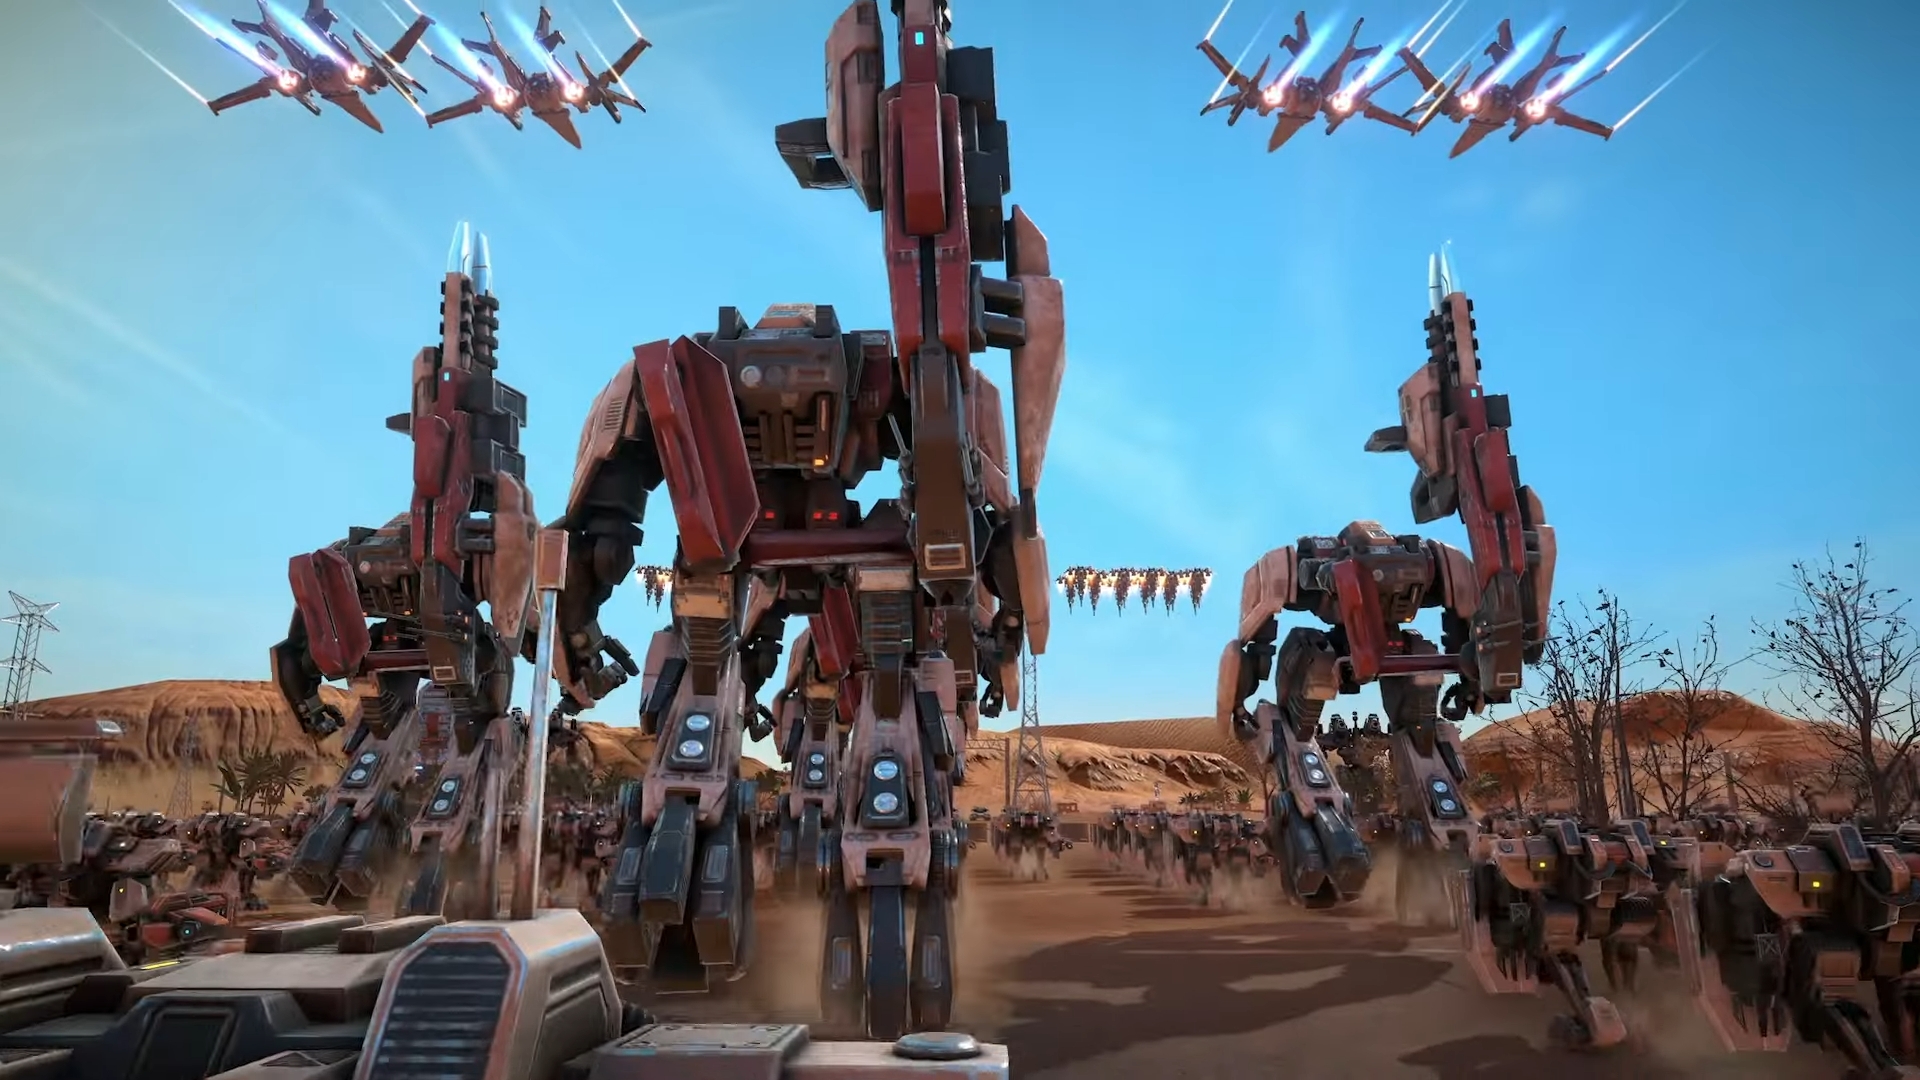 An army of mechs on the march